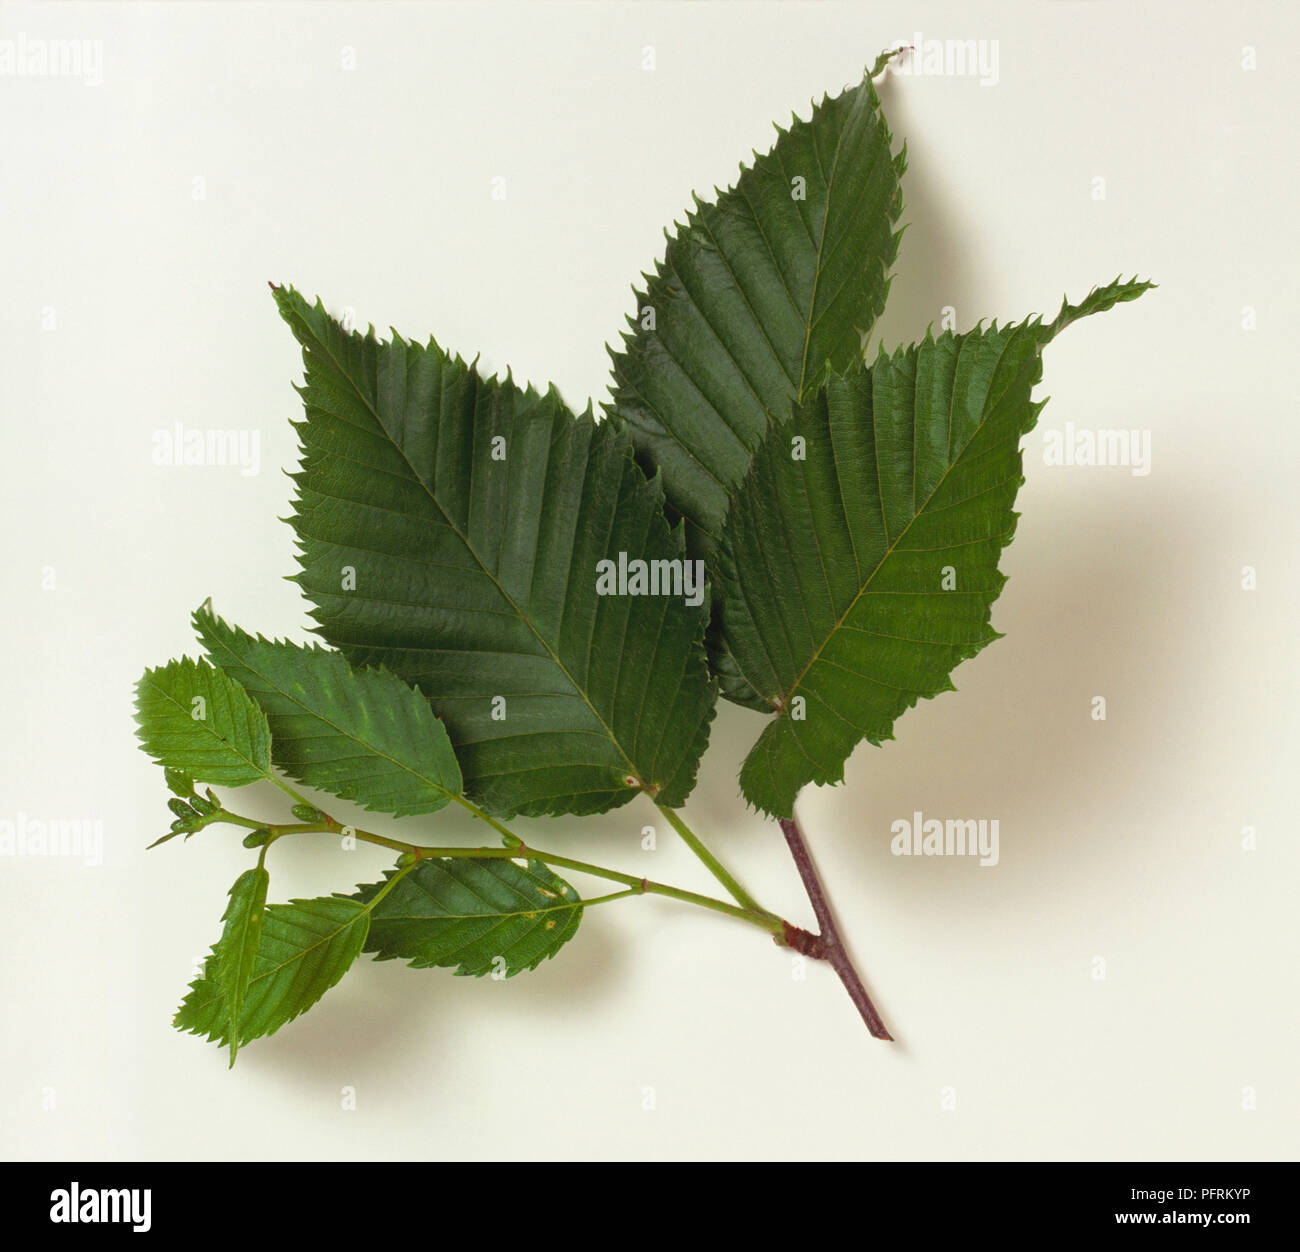 Betula grossa (Japanese cherry birch), stem with ovate, toothed leaves and young catkins Stock Photo